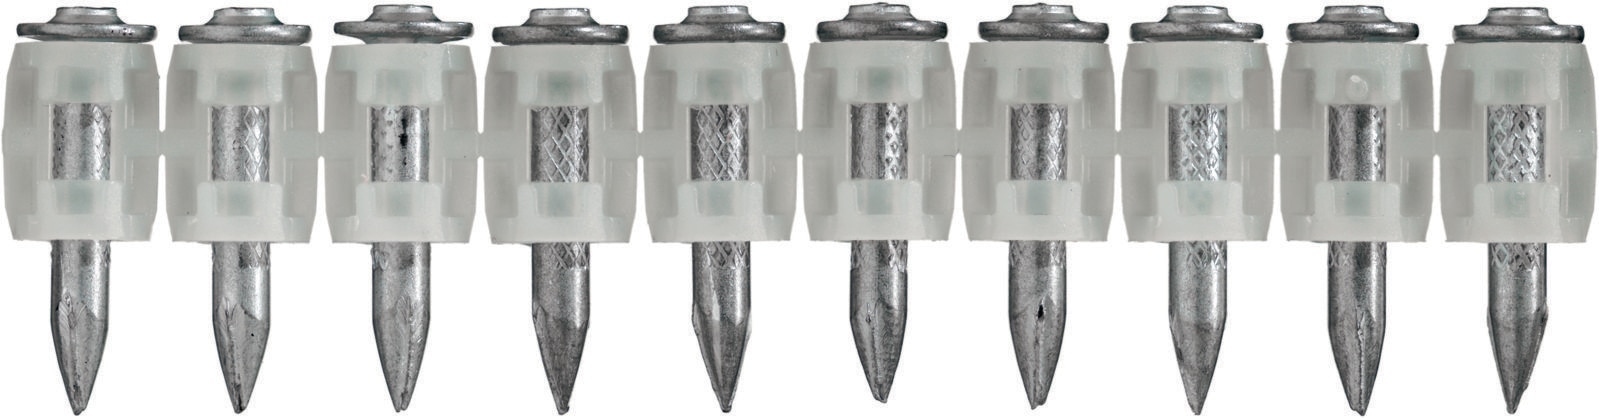 X-GN MX Concrete nails (collated) - Nails for gas-actuated tools - Hilti  Singapore